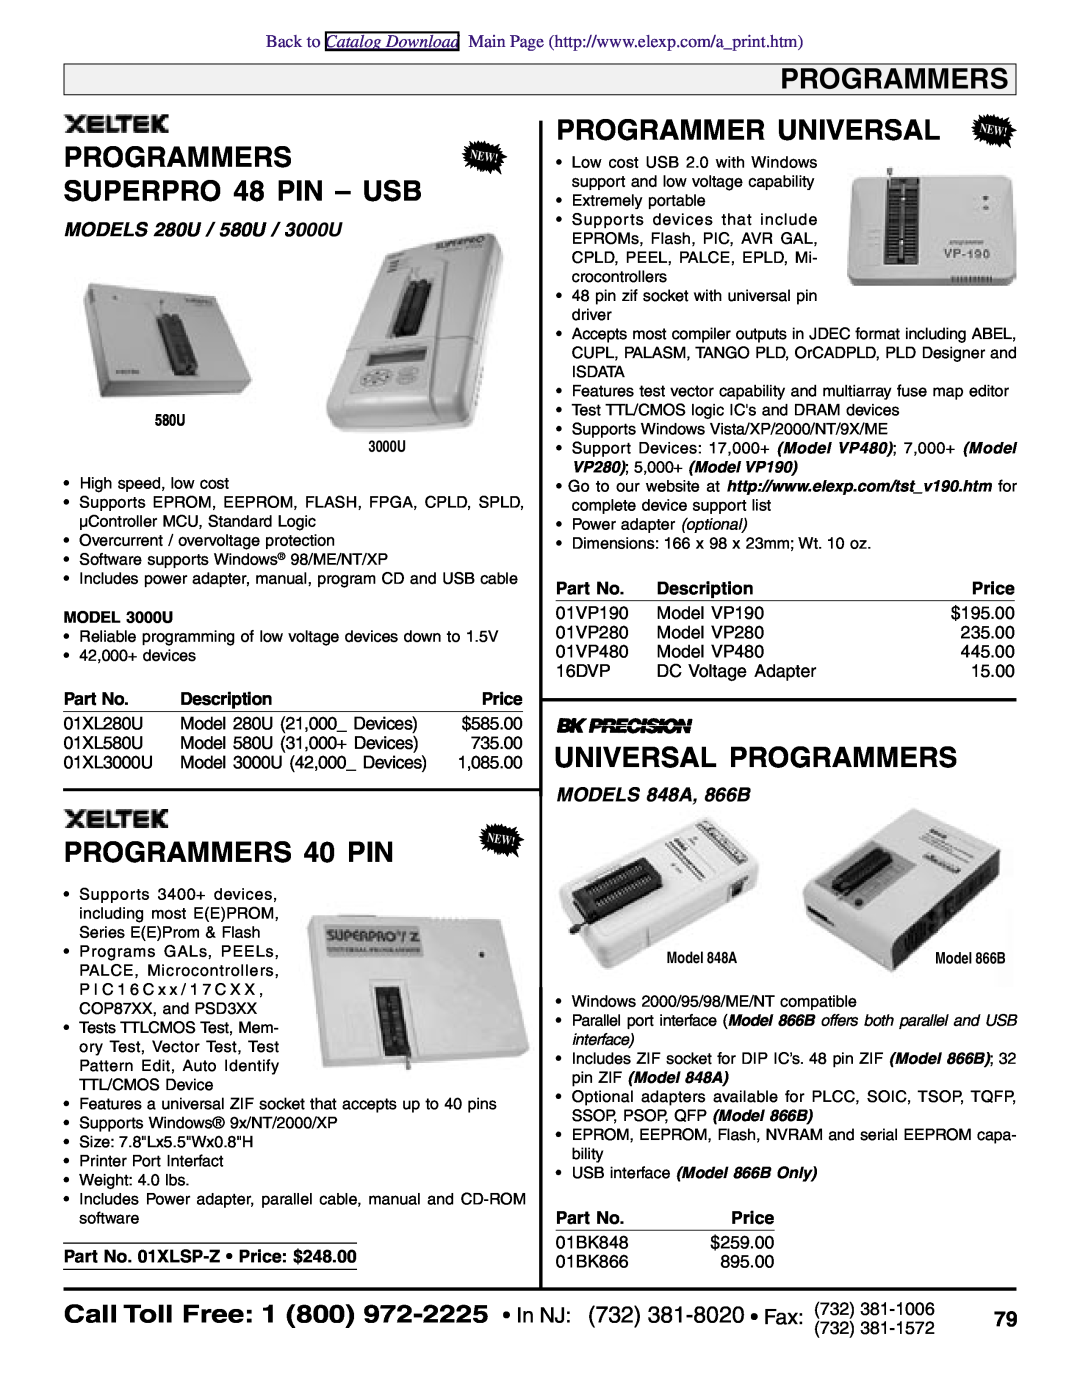 Xilinx 31WI470144879, DT3 Programmers, SUPERPRO 48 PIN - USB, PROGRAMMERS 40 PIN, Programmer Universal, Description, Price 